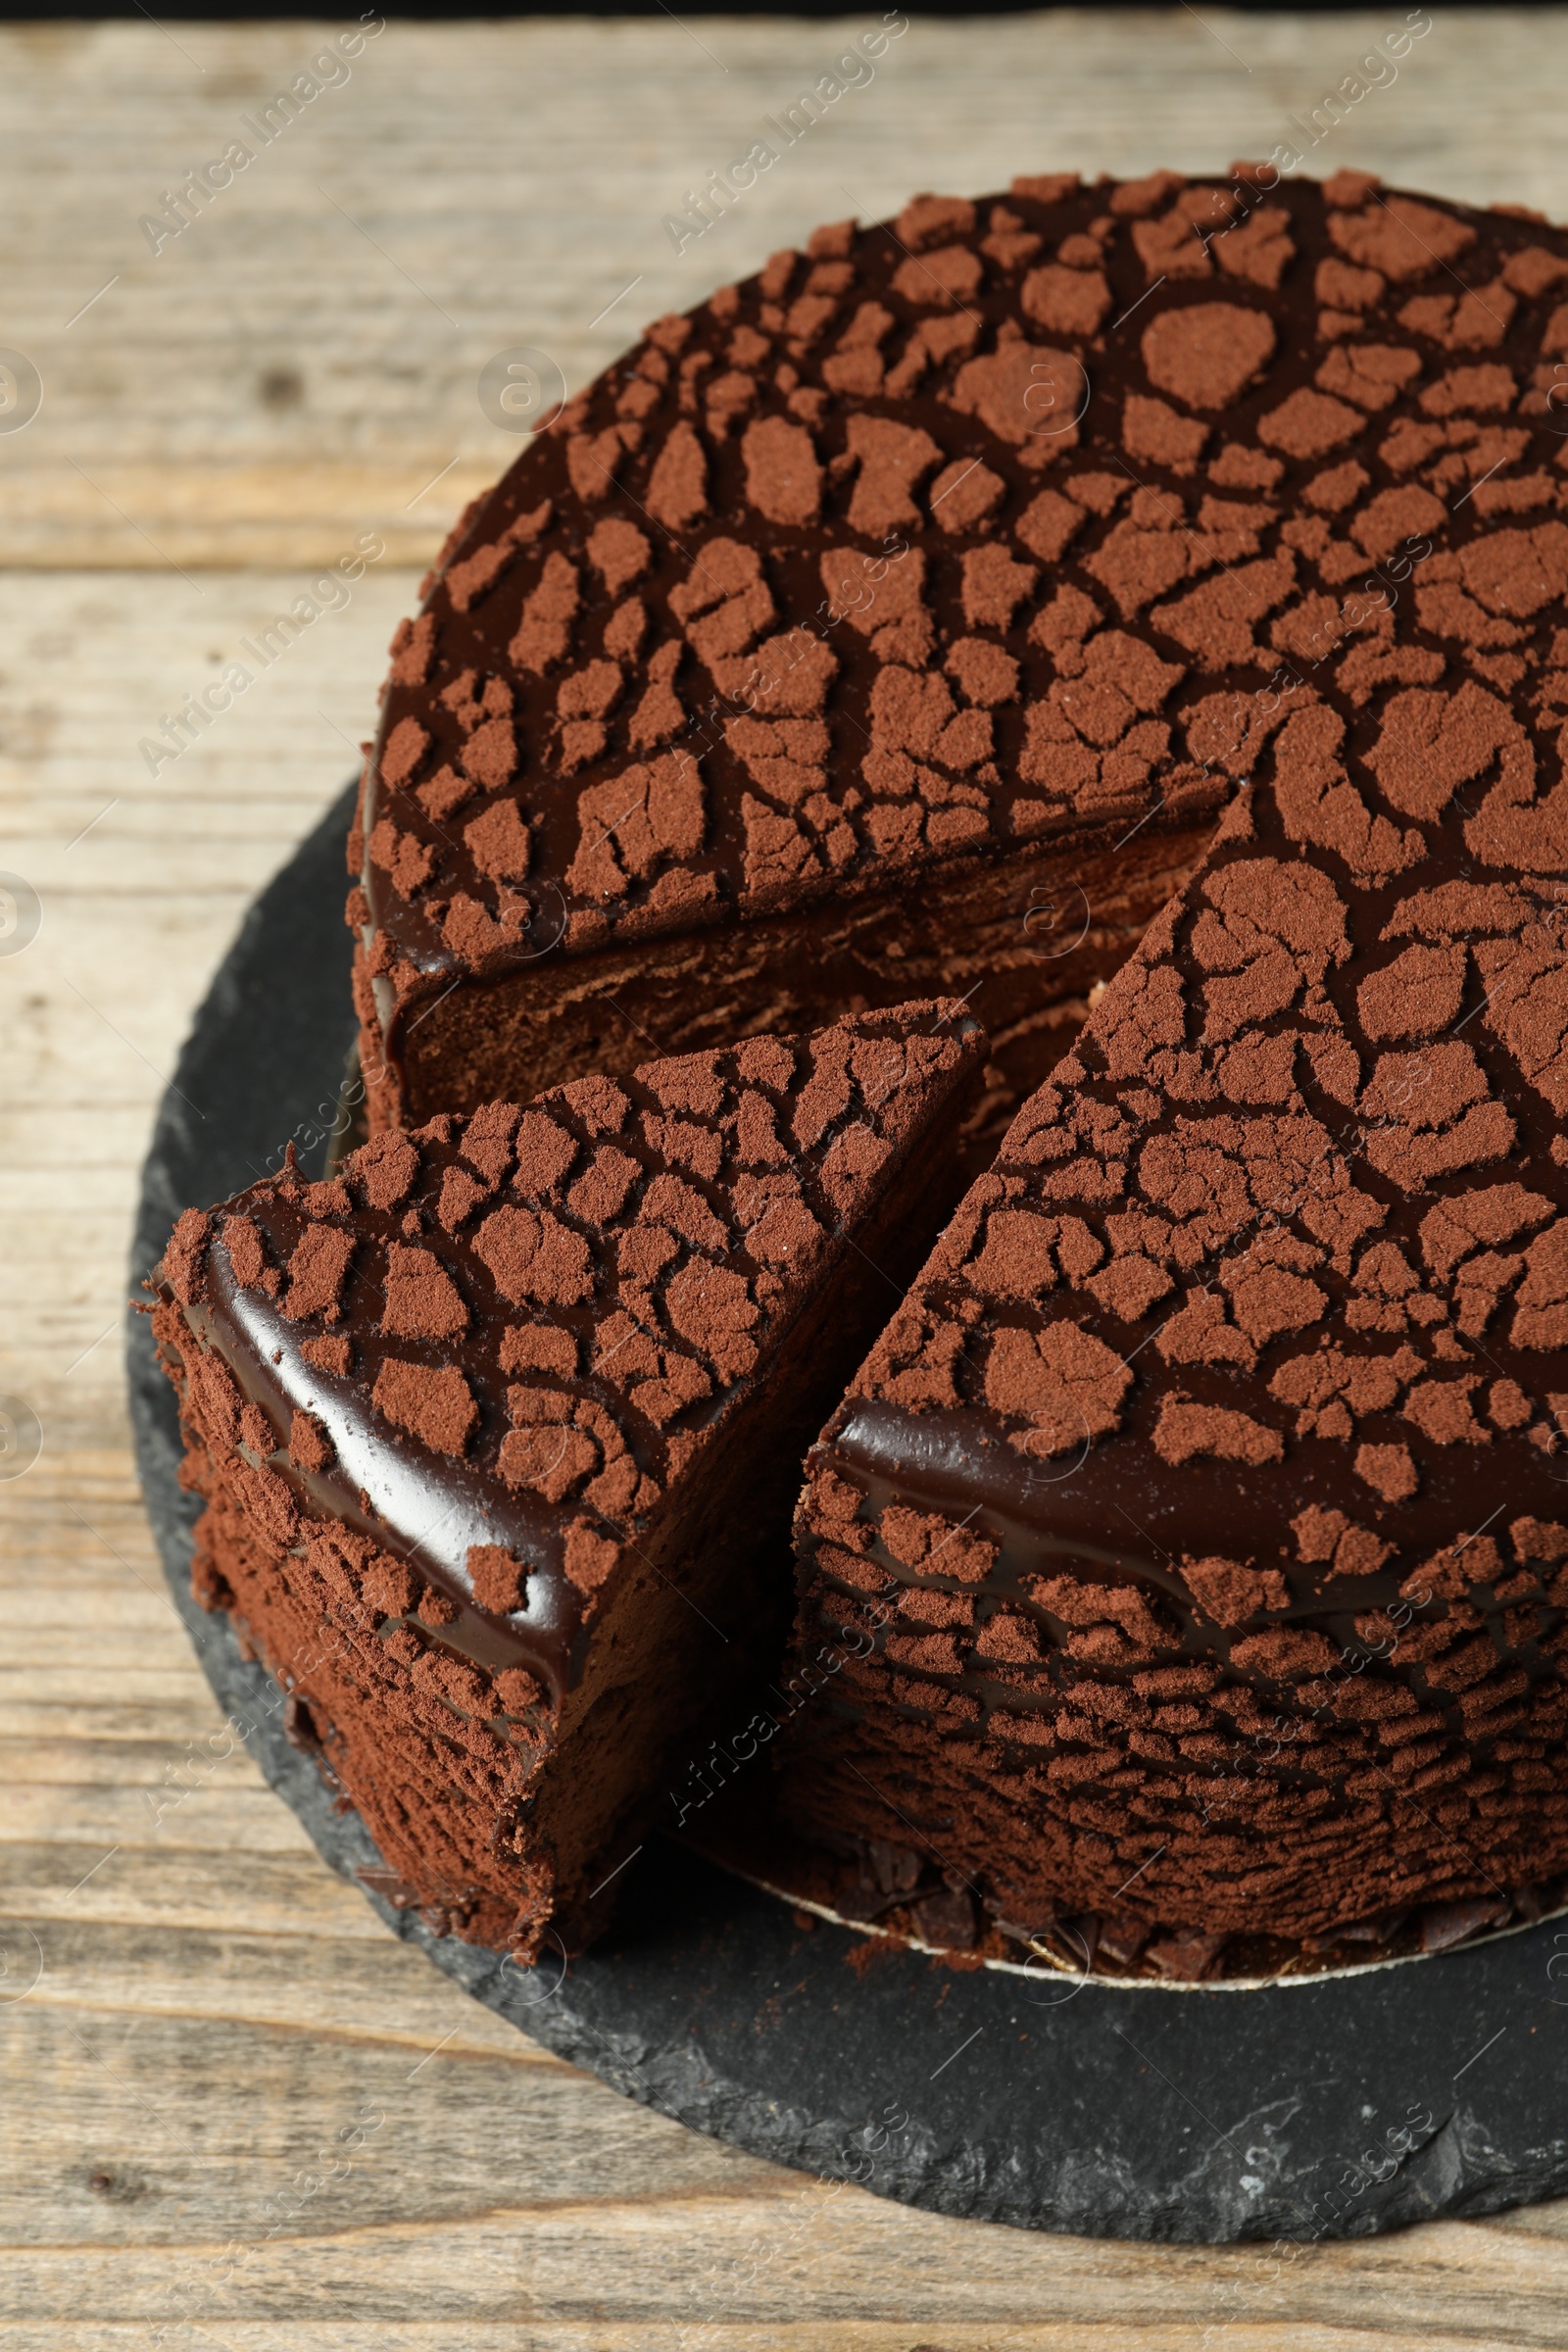 Photo of Delicious chocolate truffle cake on wooden table